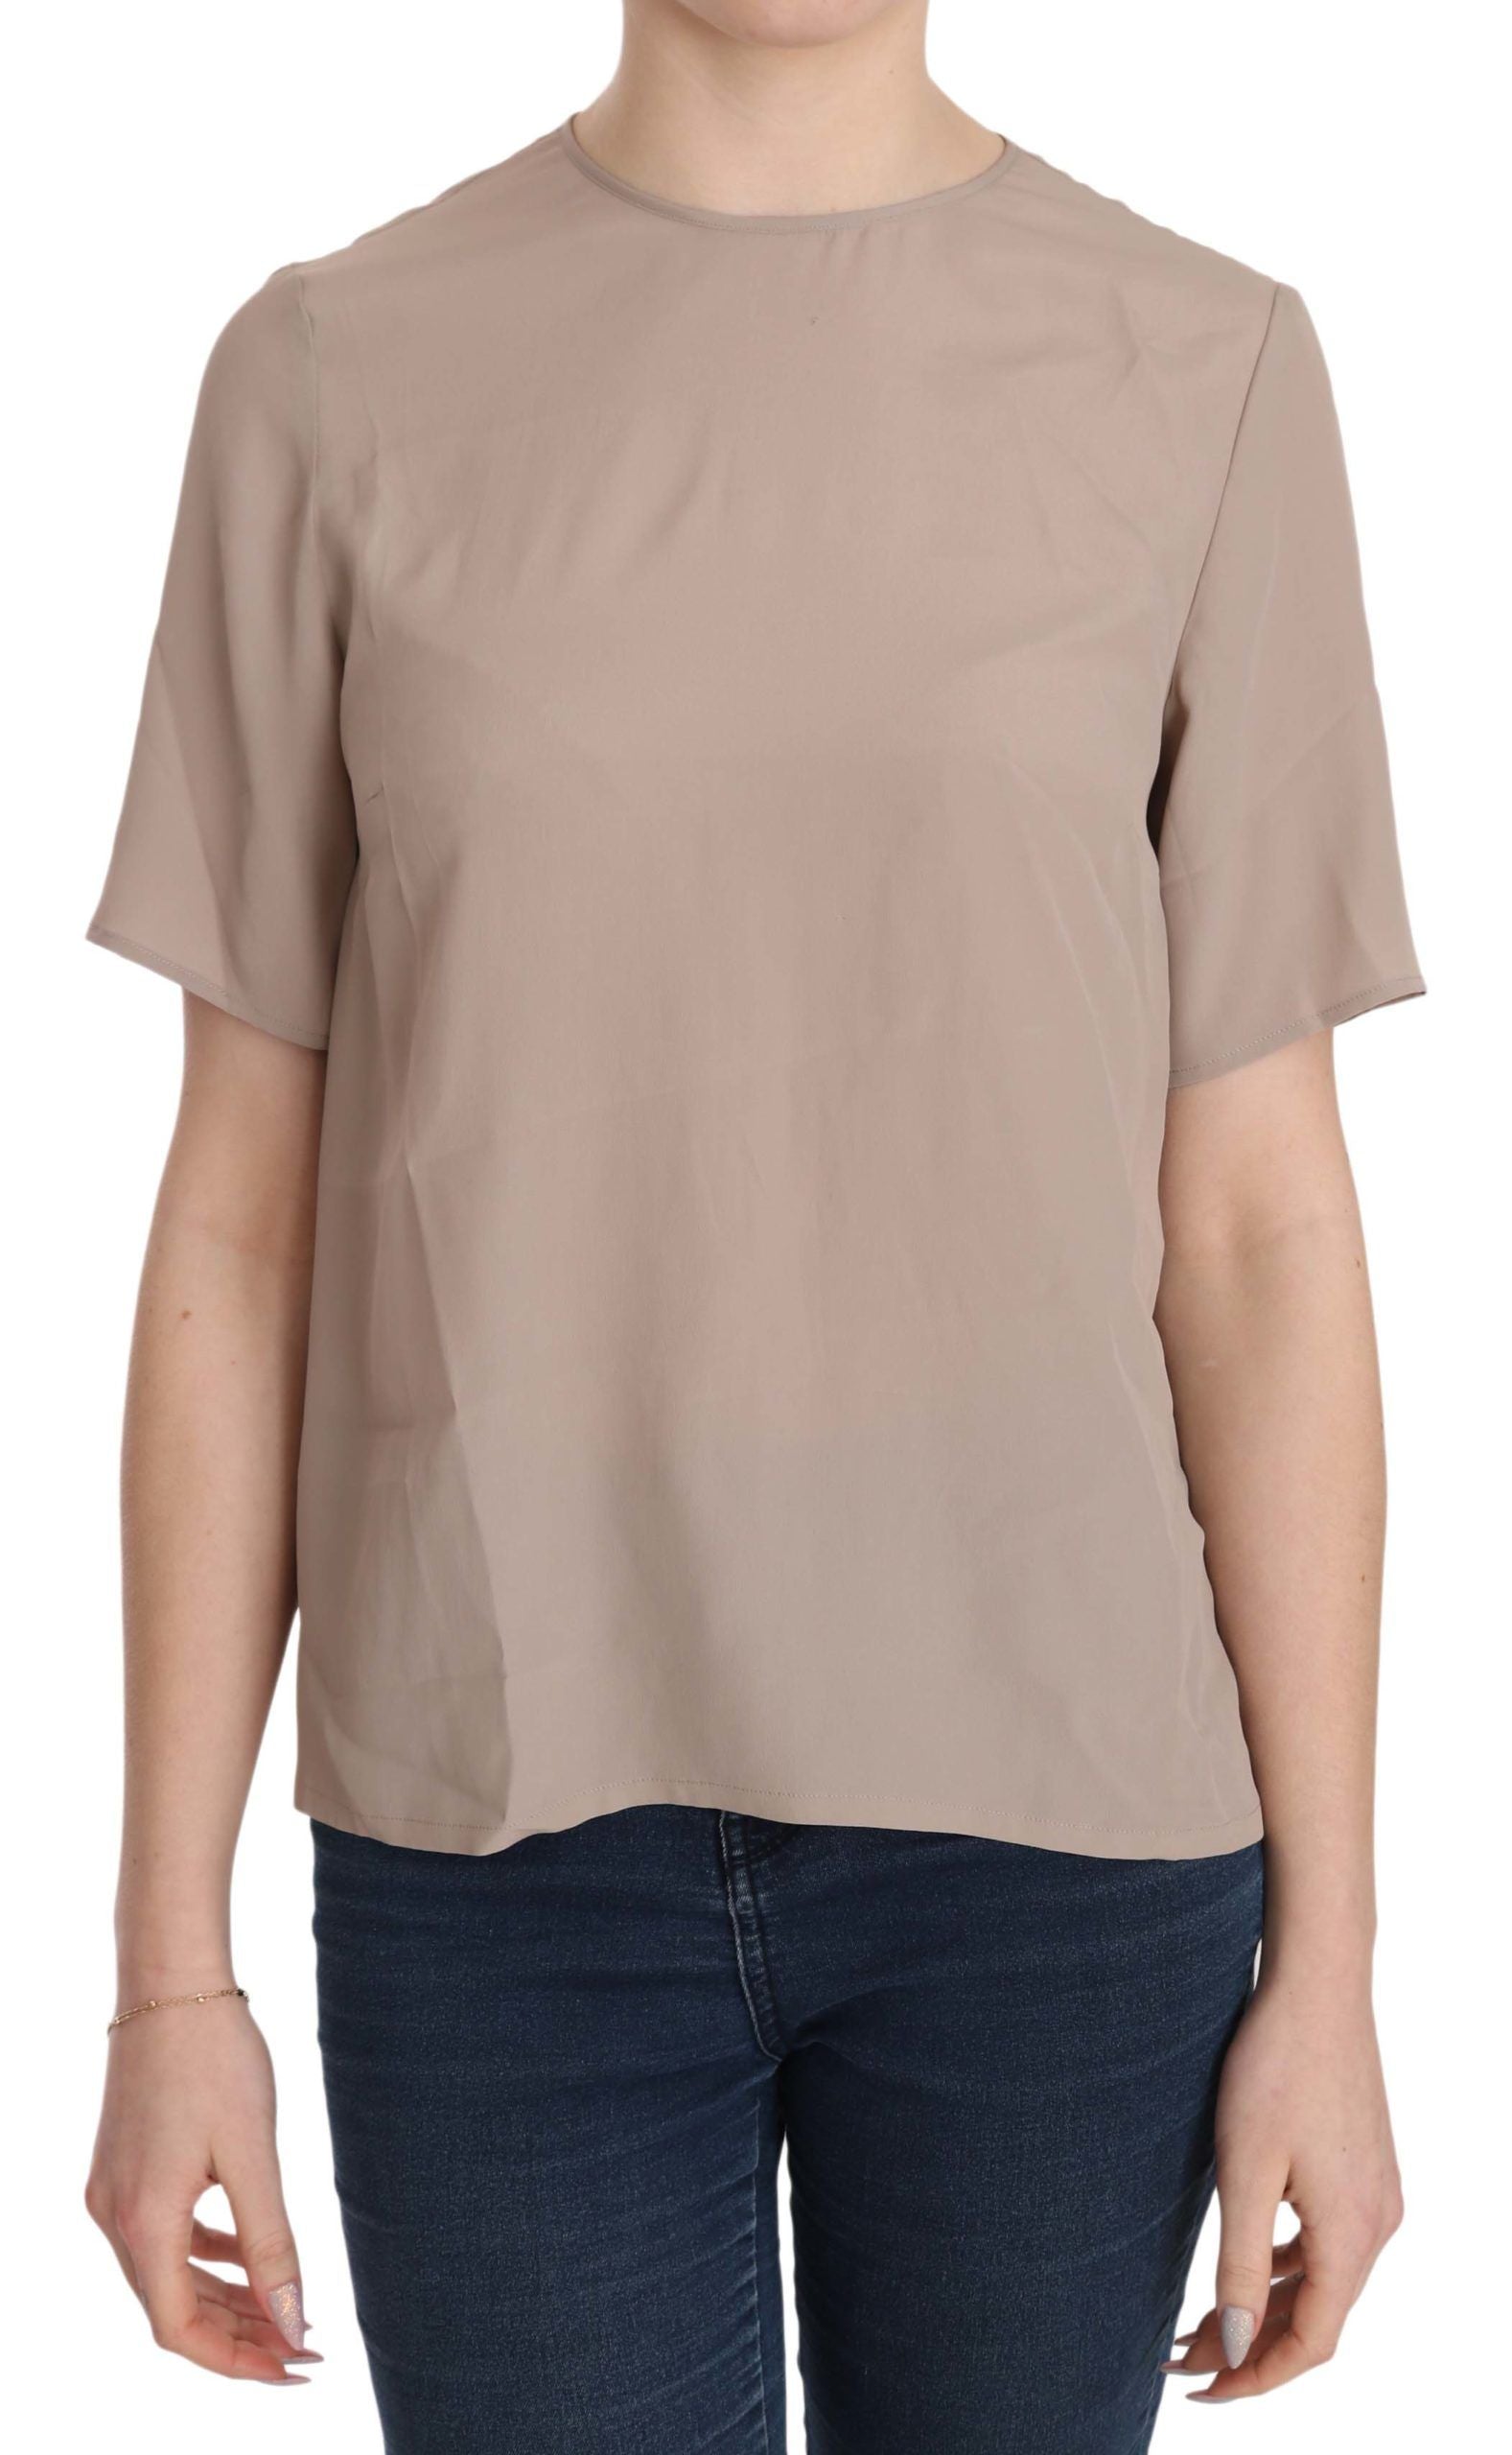 Beige Crew Neck Short Sleeve Blouse - Designed by Dolce & Gabbana Available to Buy at a Discounted Price on Moon Behind The Hill Online Designer Discount Store